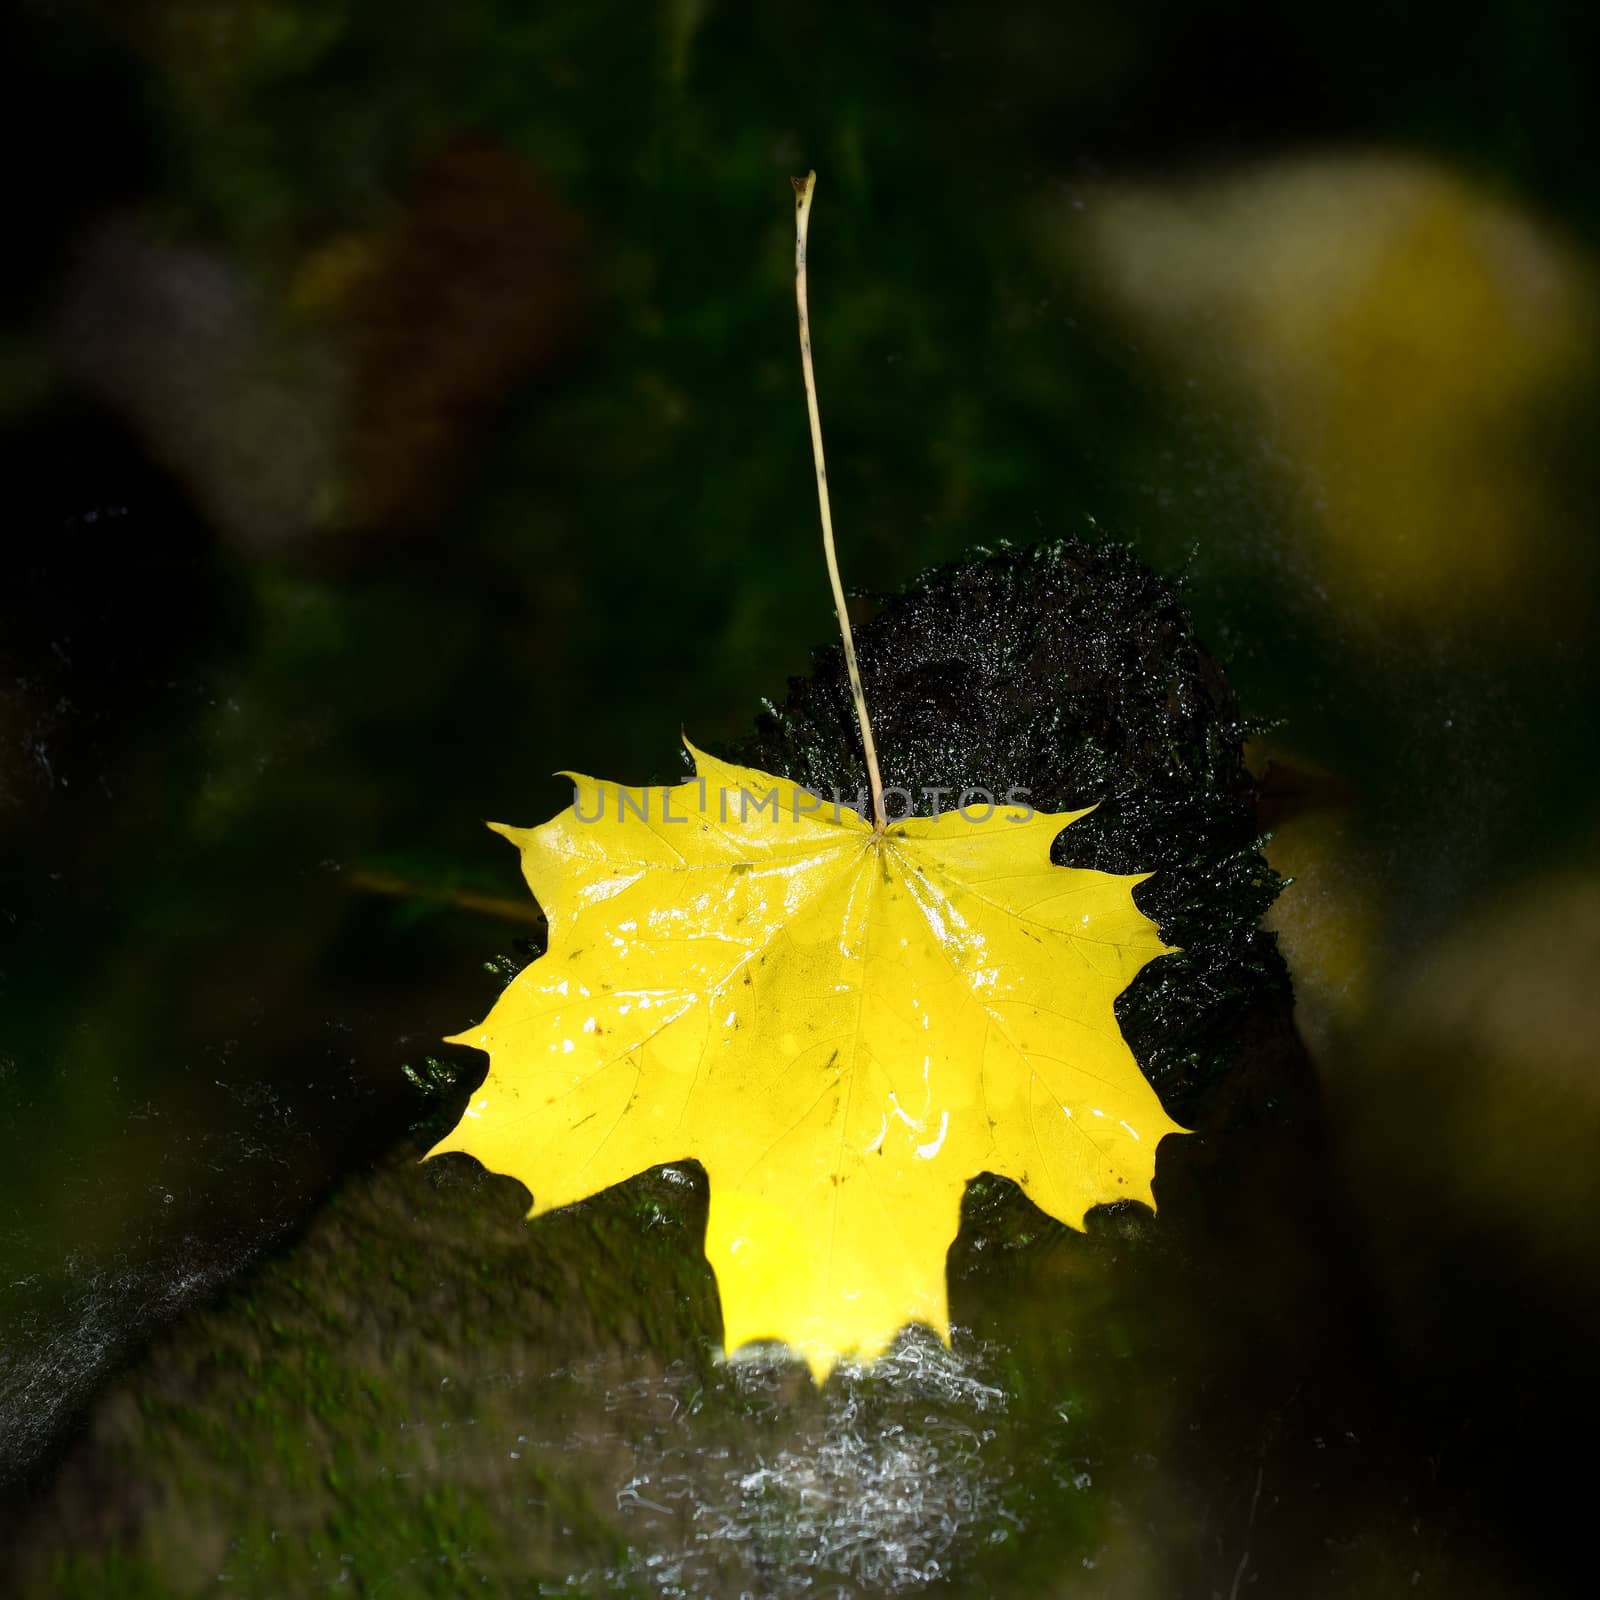 Yellow maple leaf on stone in rapids. Fallen leaves caught on stone in water with green algae.